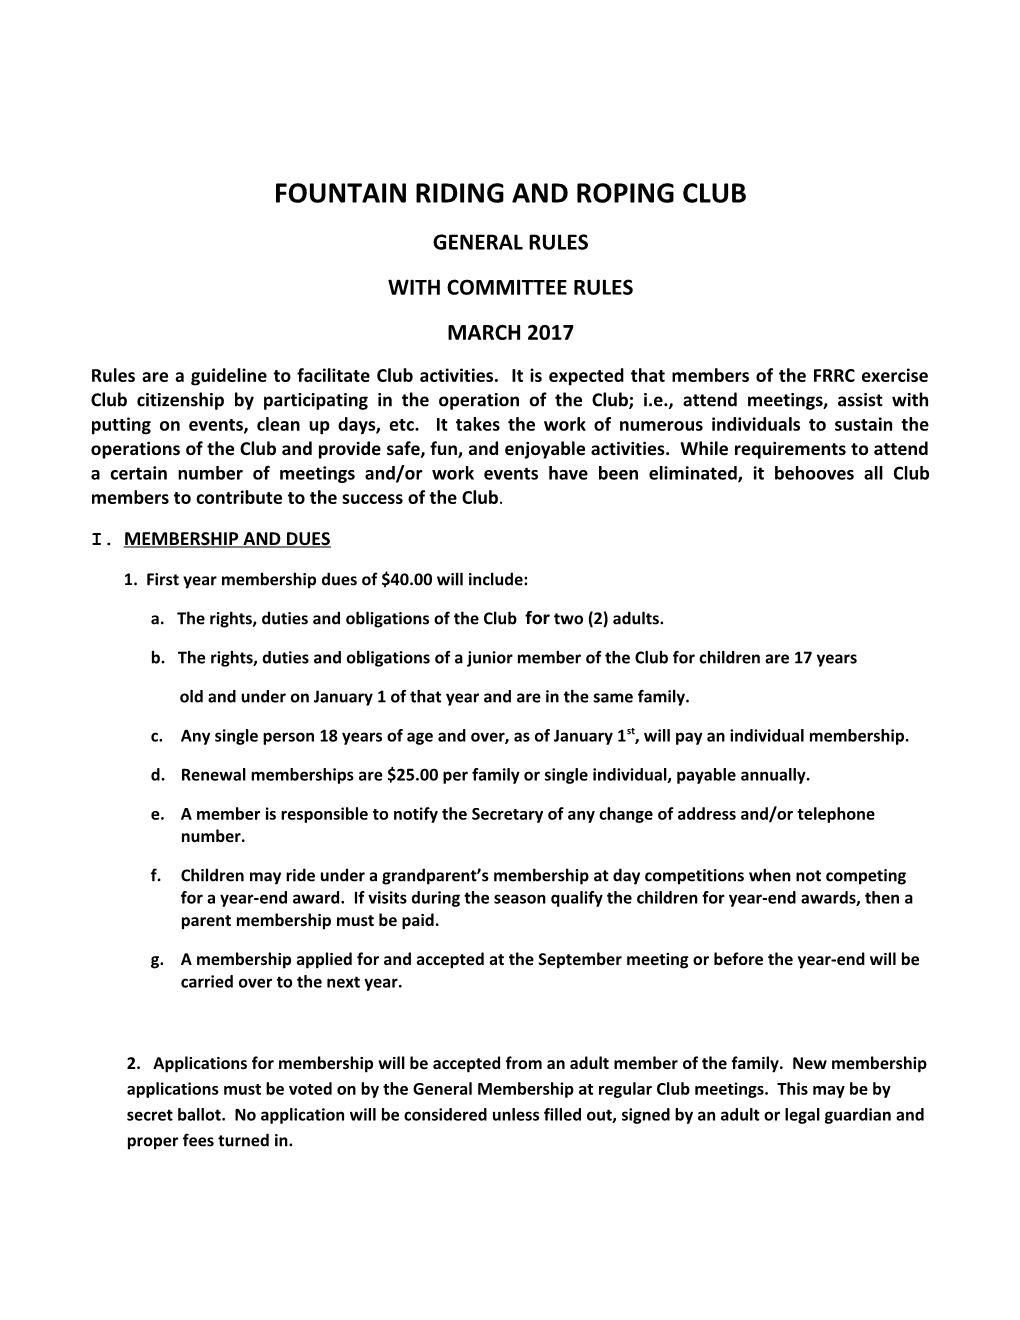 Fountain Riding and Roping Club